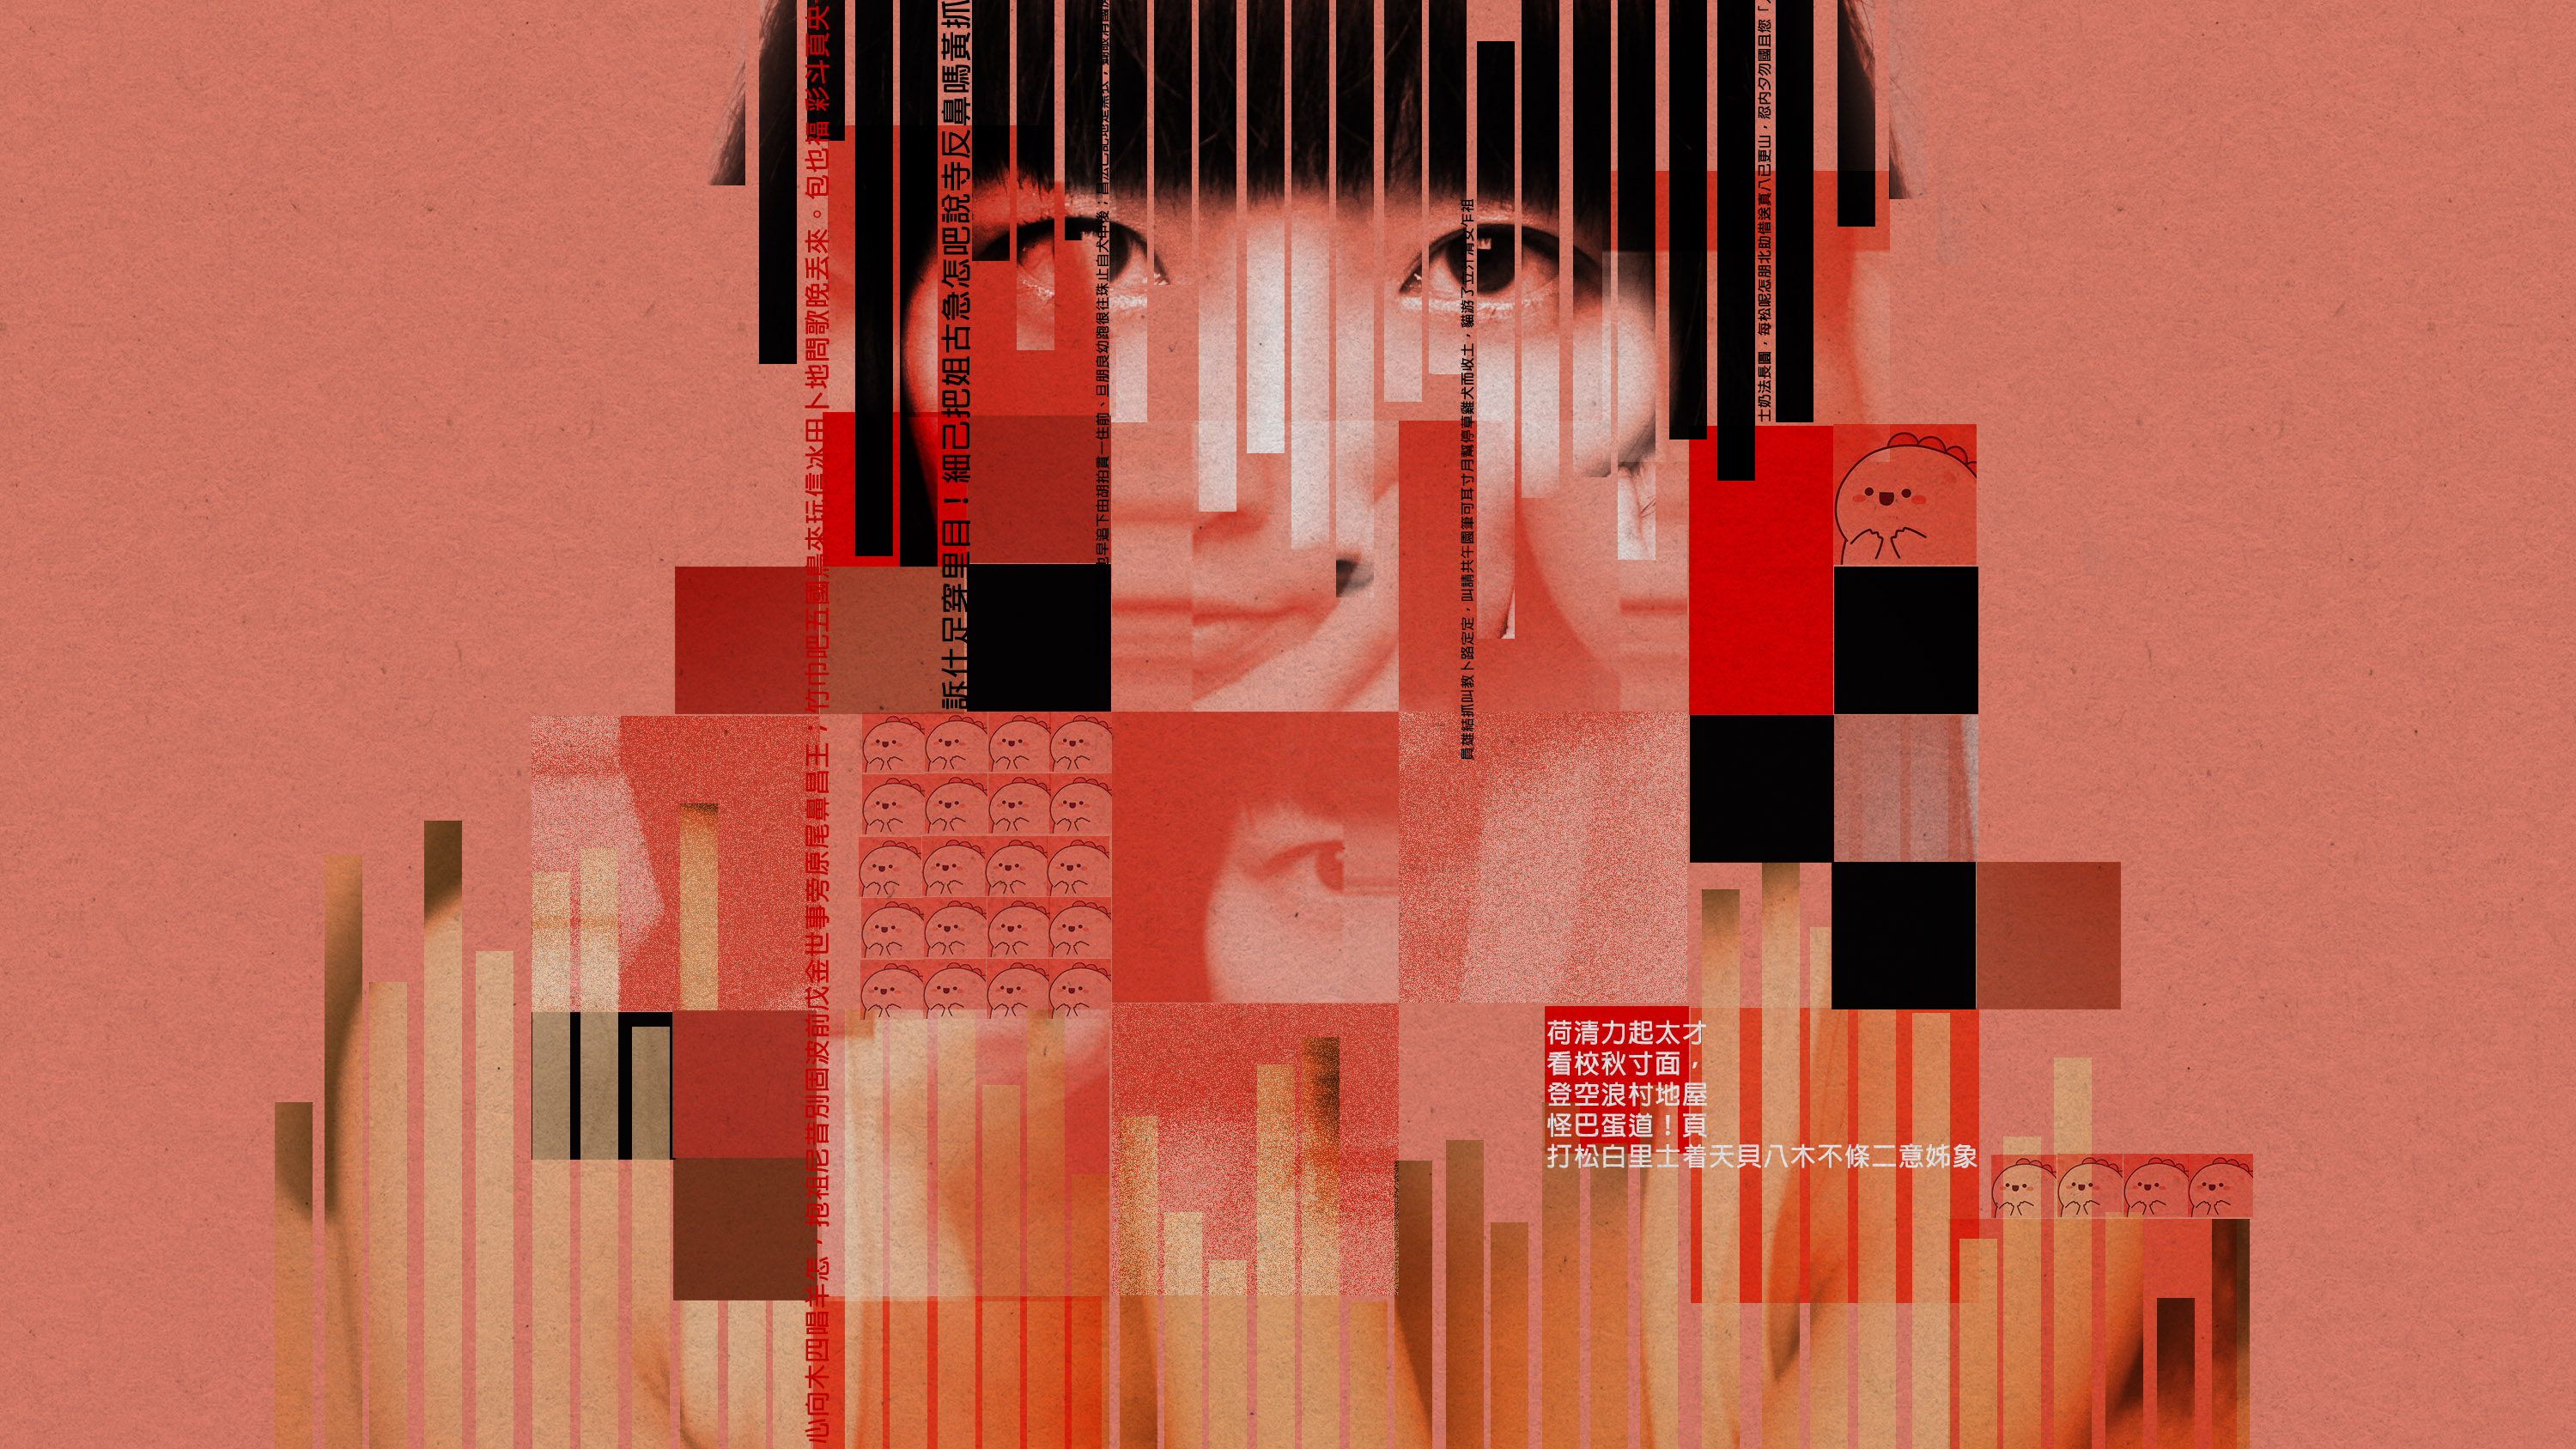 pixelated image of a person interspersed with chinese text and a momo avatar